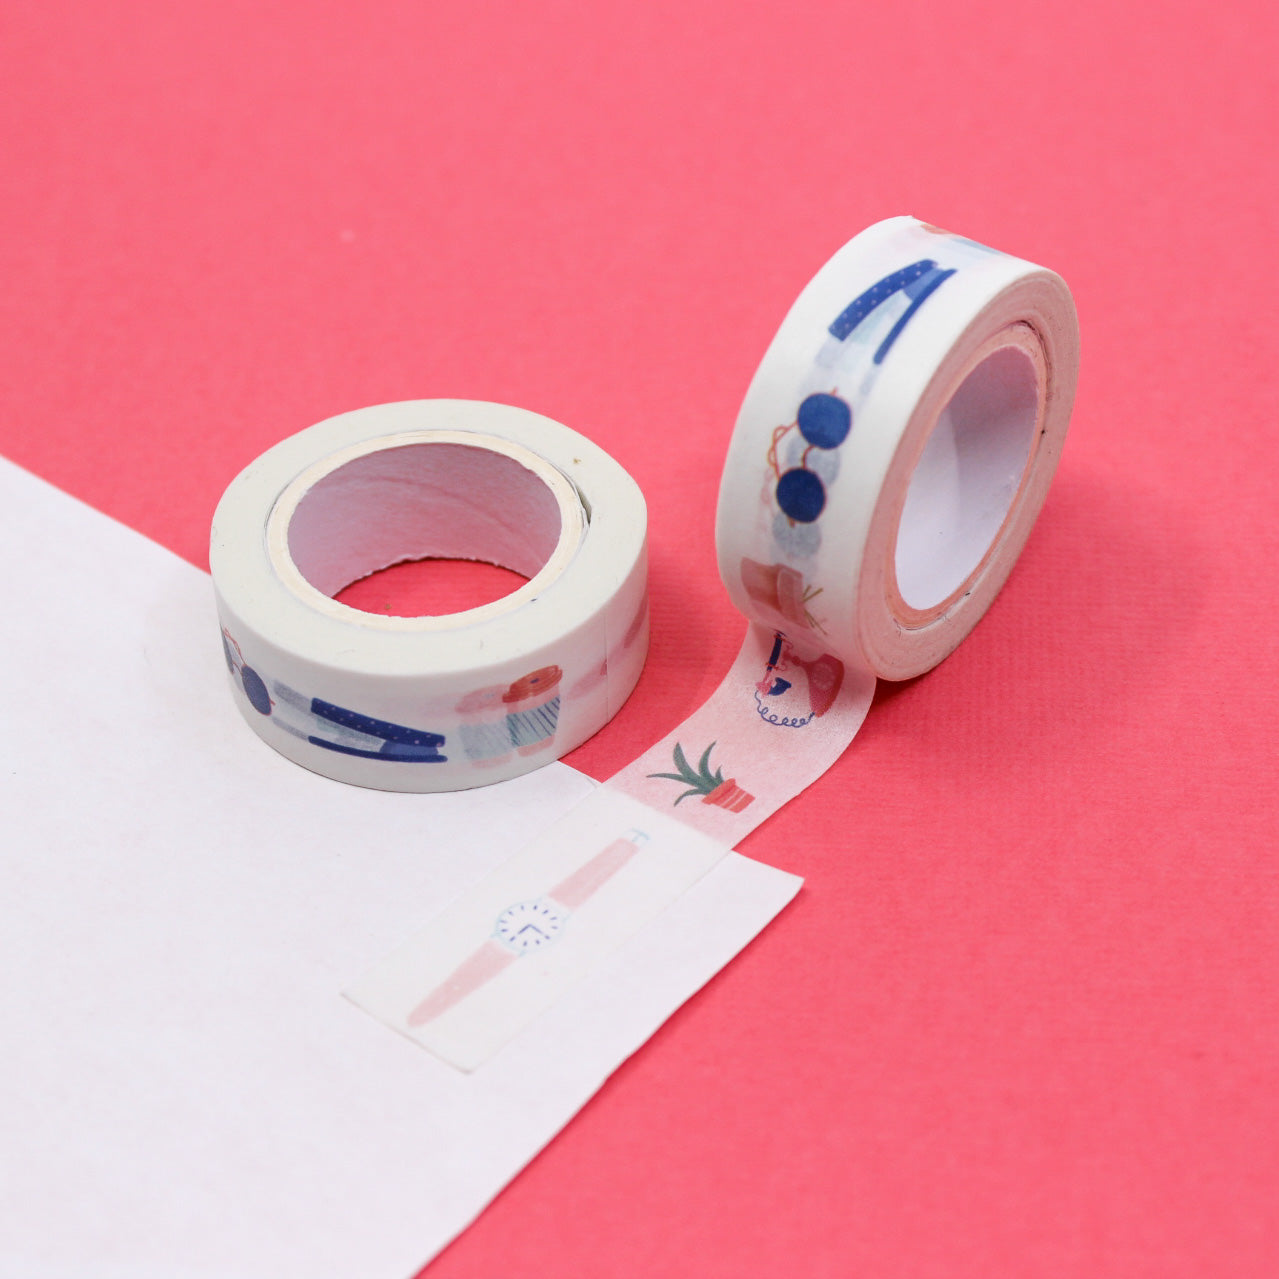 Add a touch of feminine flair to your workspace with our Girly Work Supplies Washi Tape. Featuring stylish and fun work-related motifs, it adds a playful and decorative touch to your crafts. This tape is sold at BBB Supplies Craft Shop.